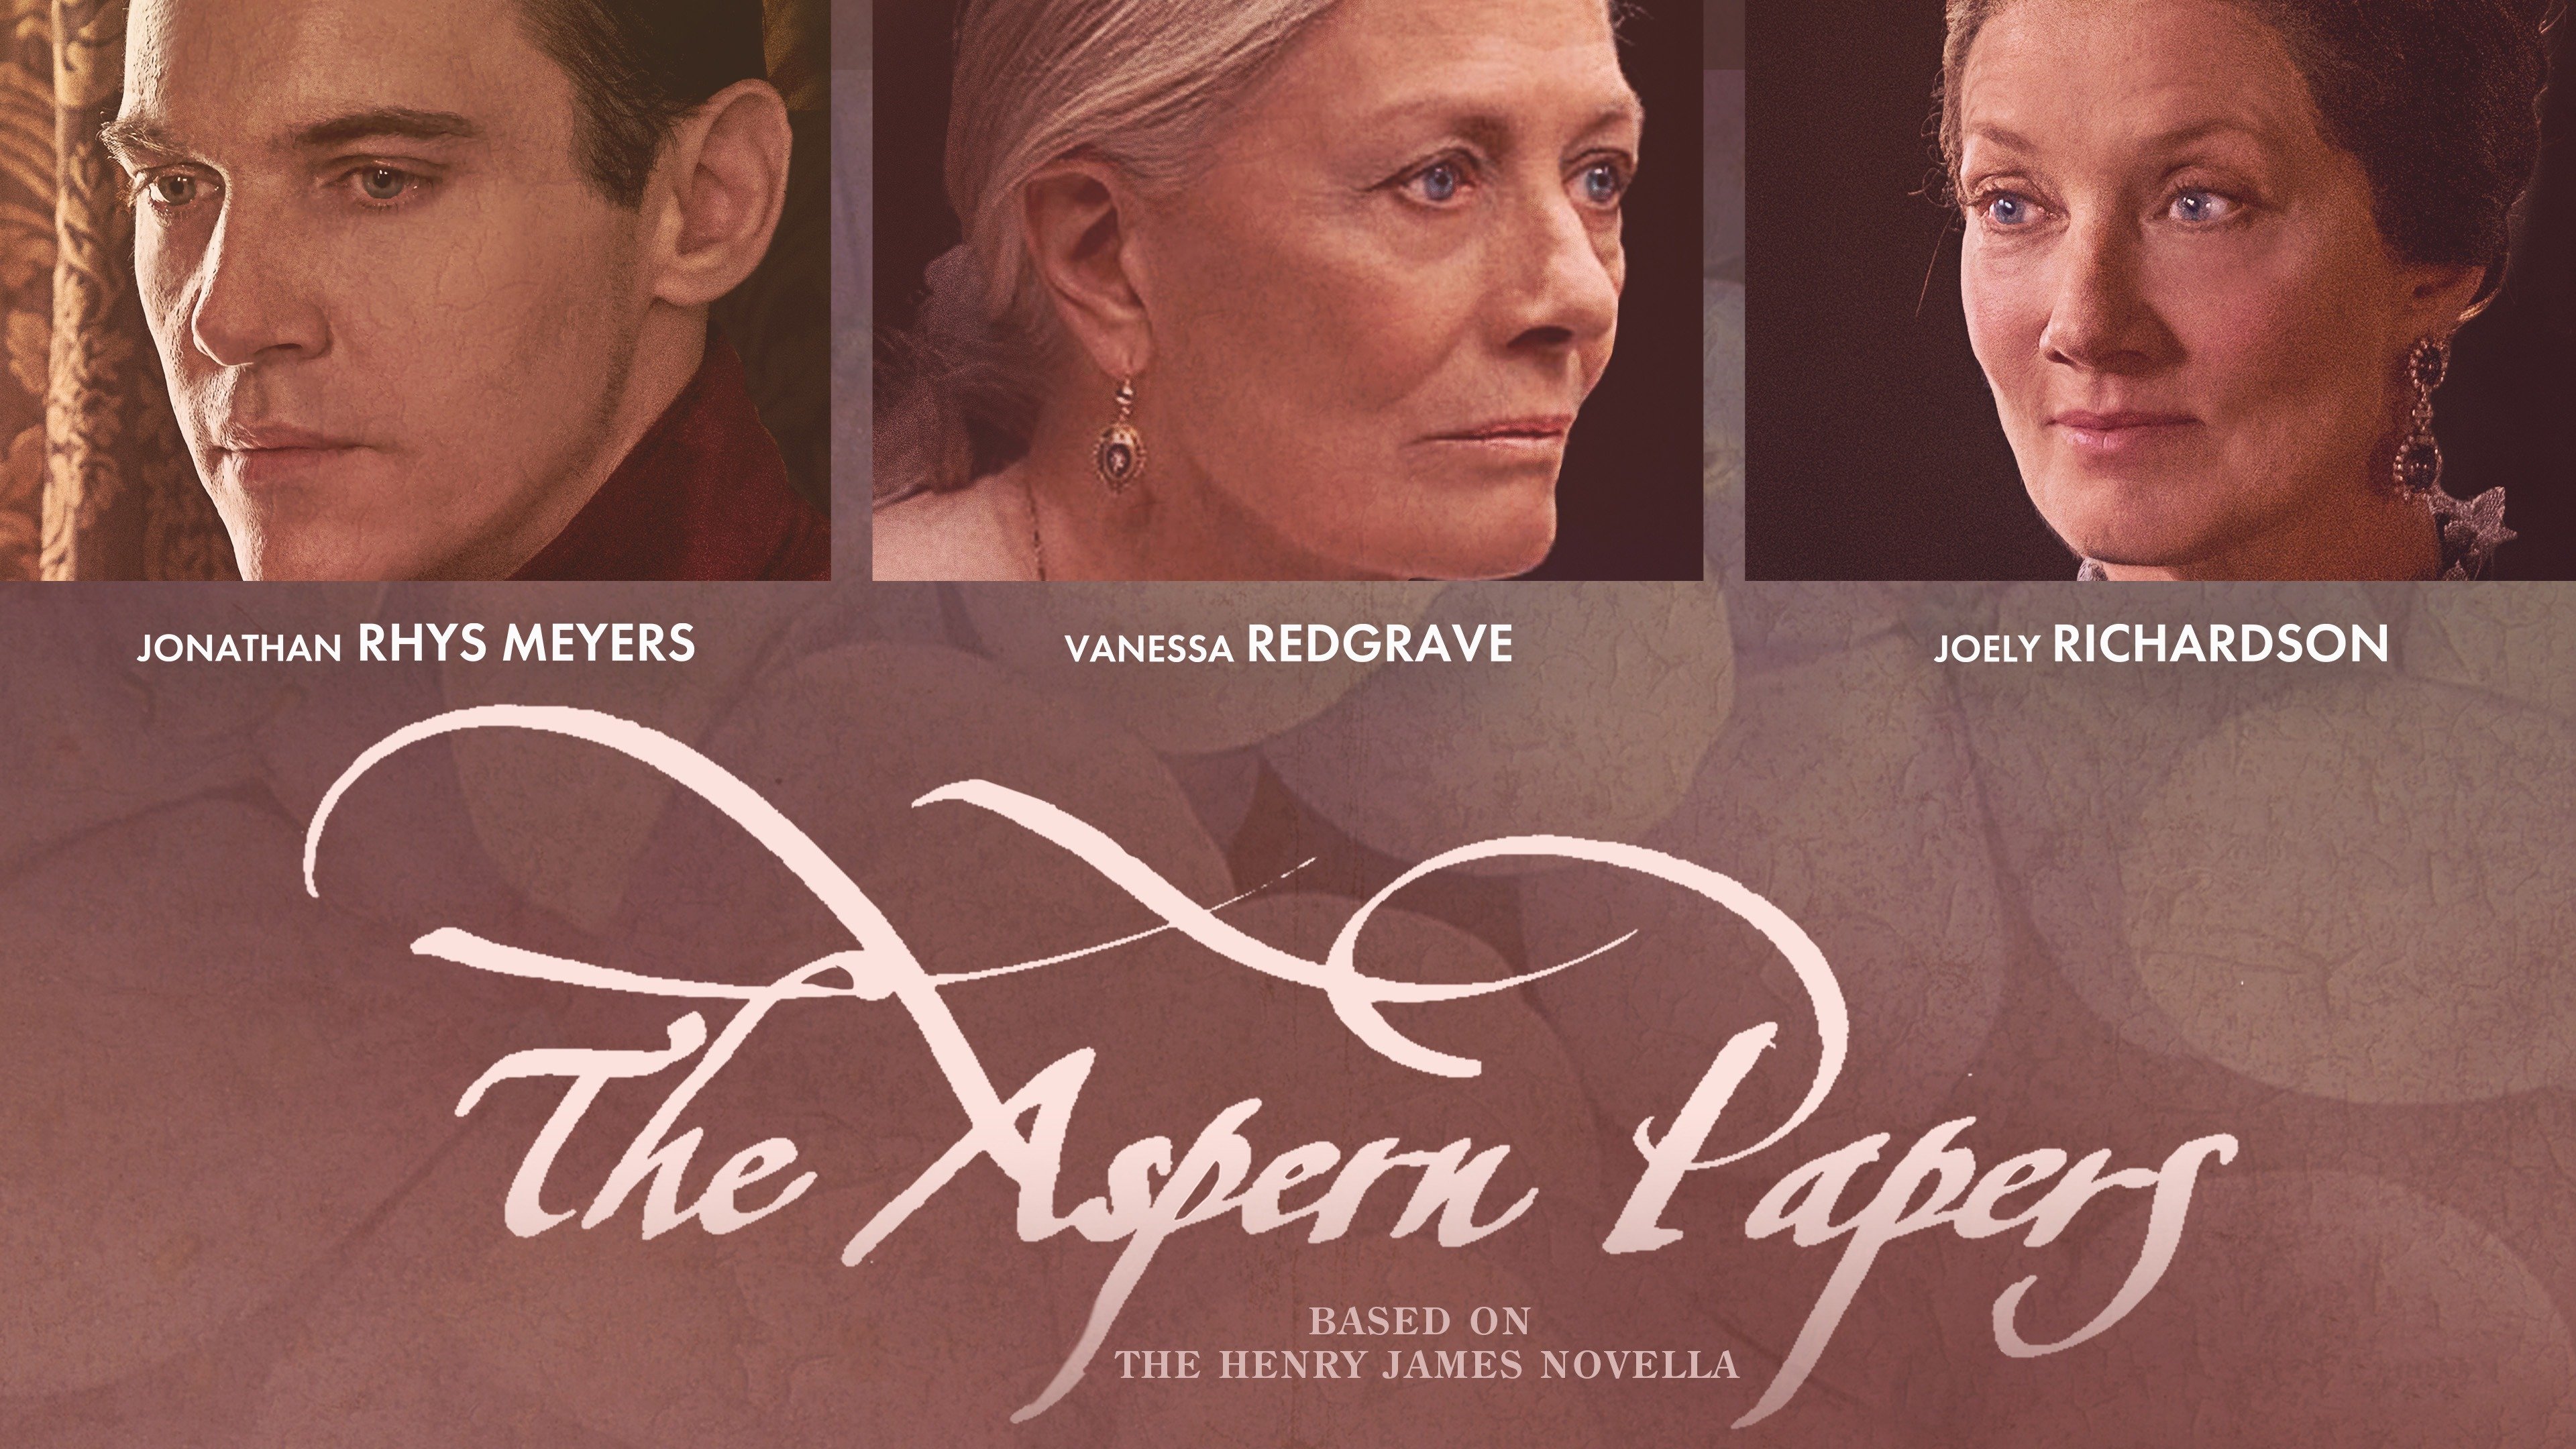 aspern papers movie review